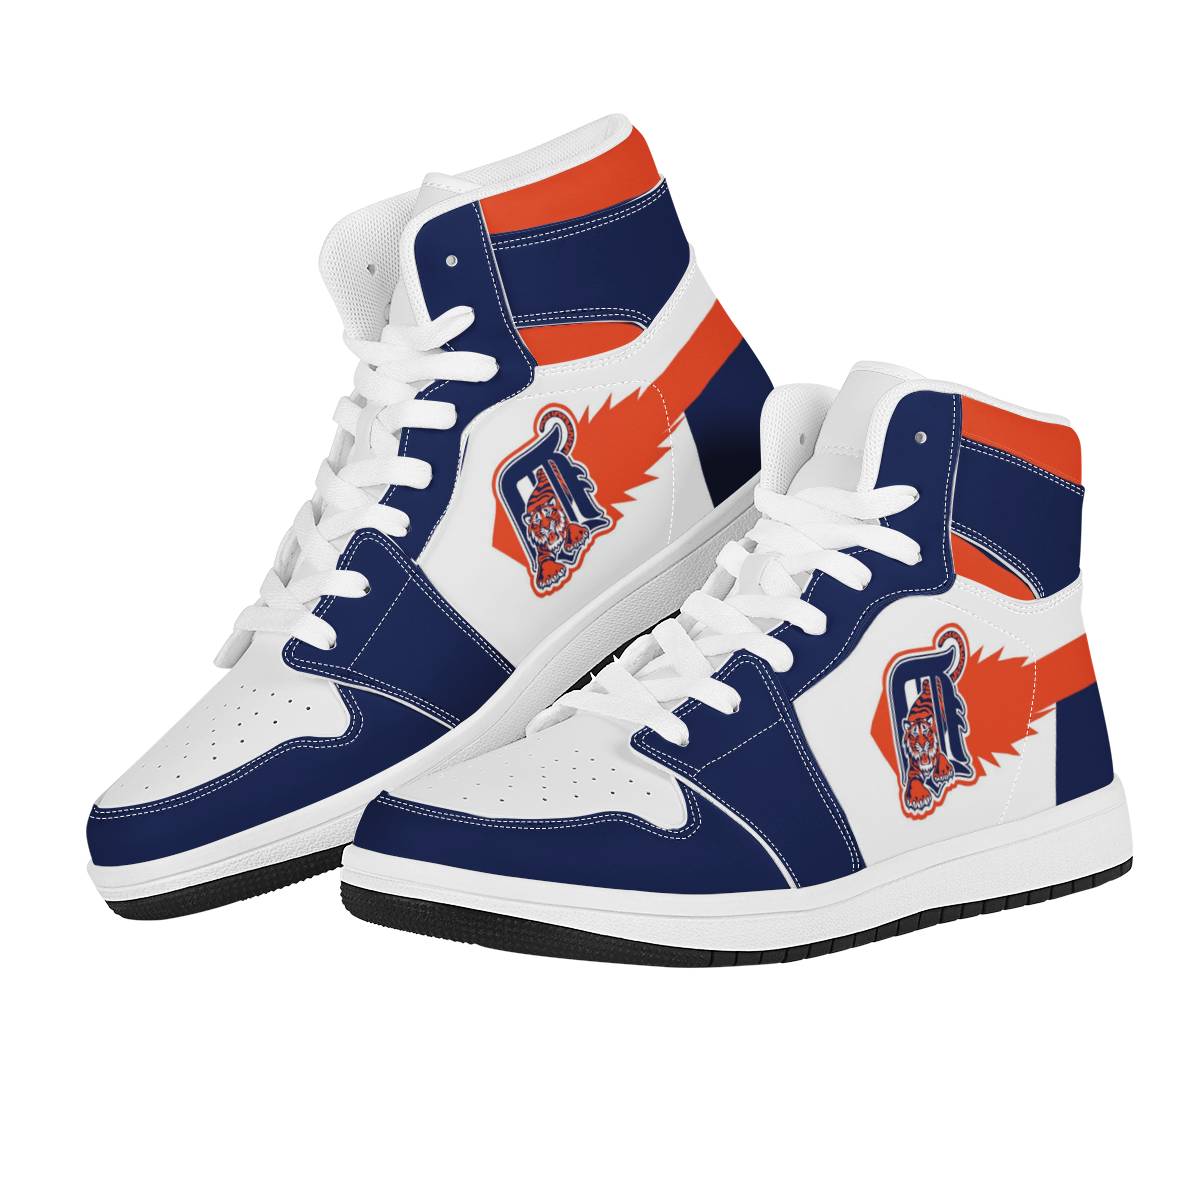 Women's Detroit Tigers High Top Leather AJ1 Sneakers 002